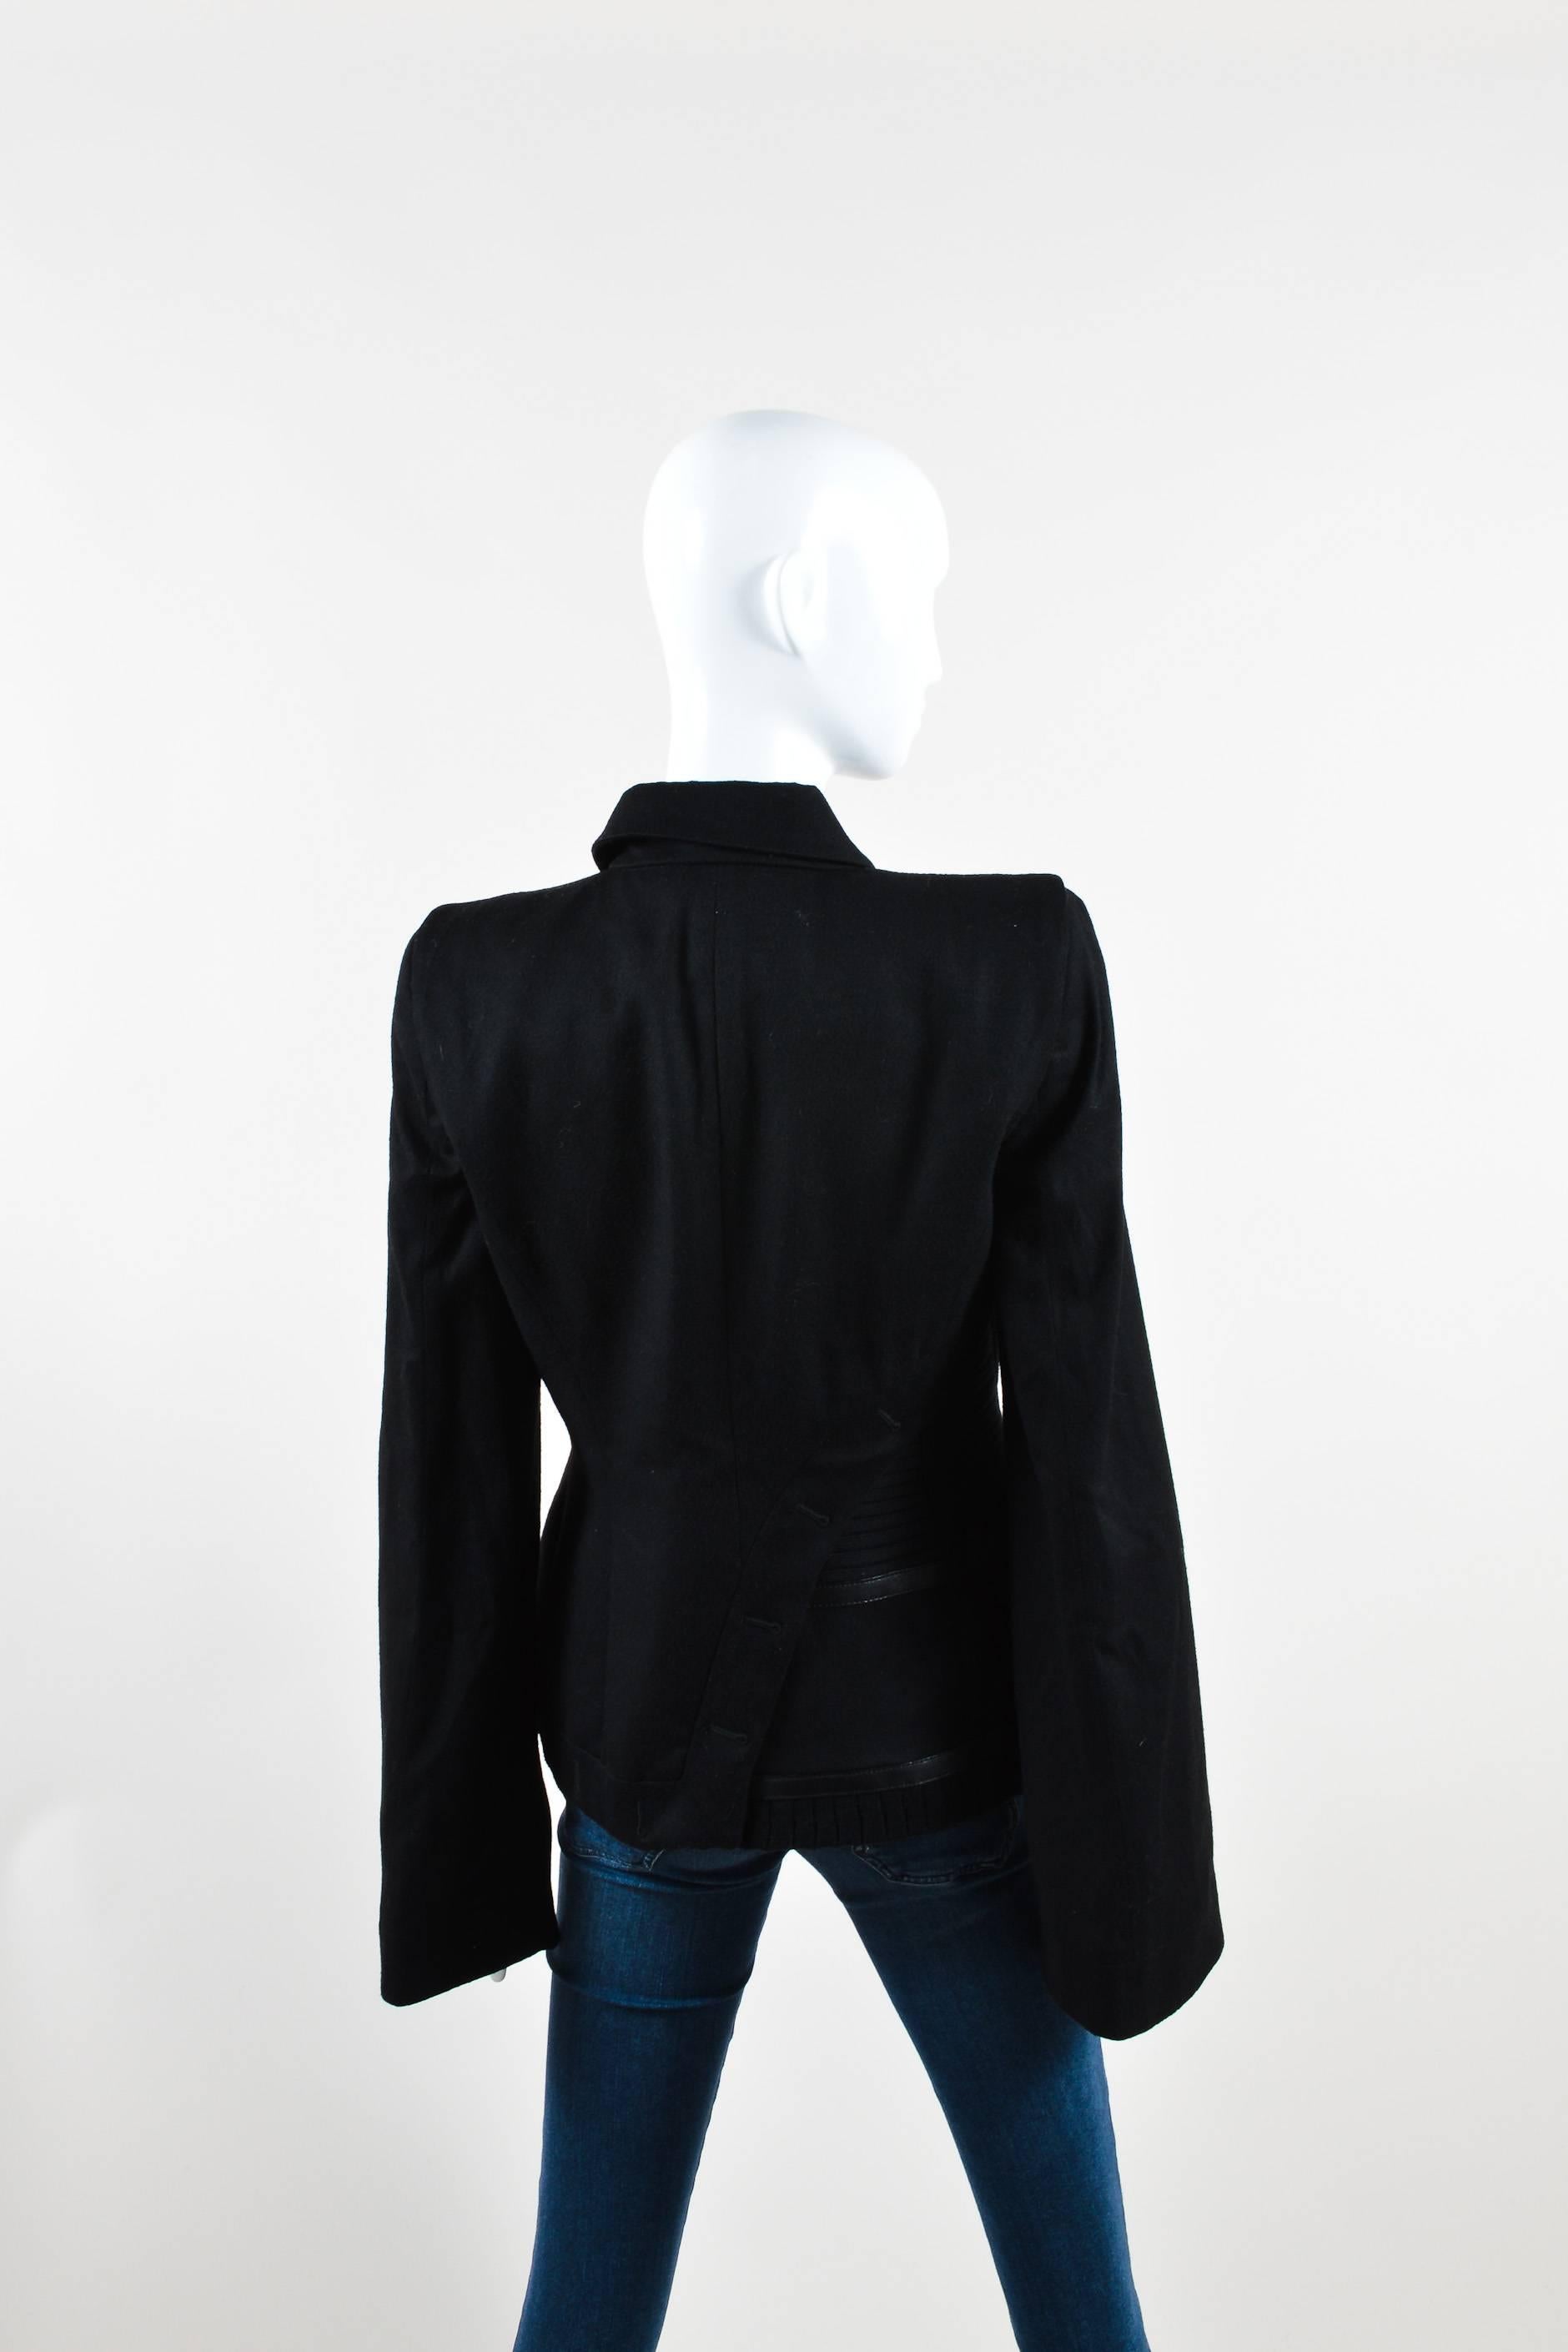 Alexander McQueen Black Wool Cashmere Blend Leather Trim Ribbed Jacket Size 42 In Good Condition For Sale In Chicago, IL